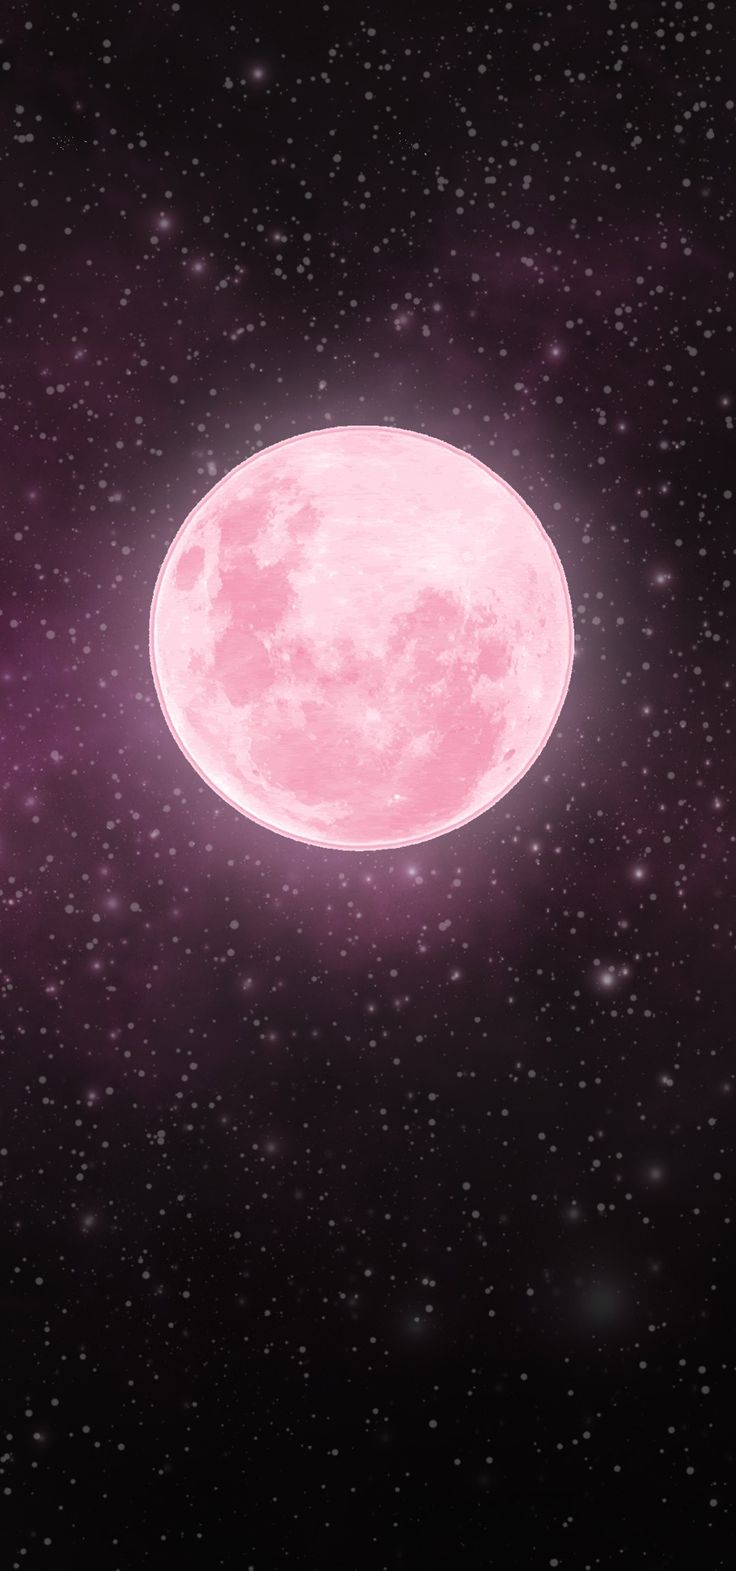 A pink full moon on a starry background - Moon